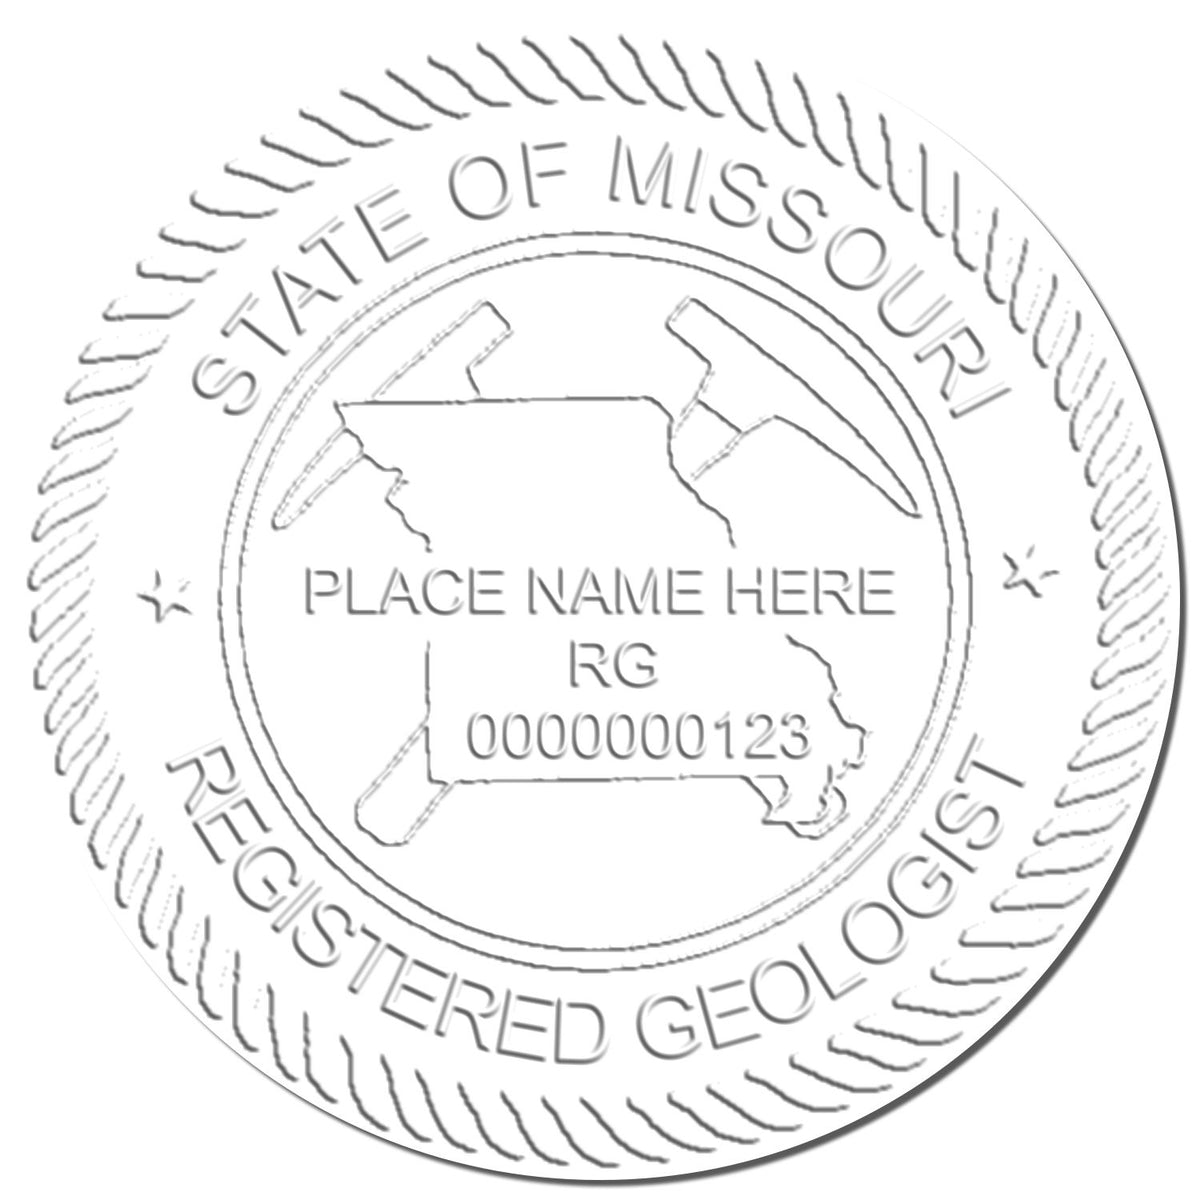 A stamped imprint of the Gift Missouri Geologist Seal in this stylish lifestyle photo, setting the tone for a unique and personalized product.